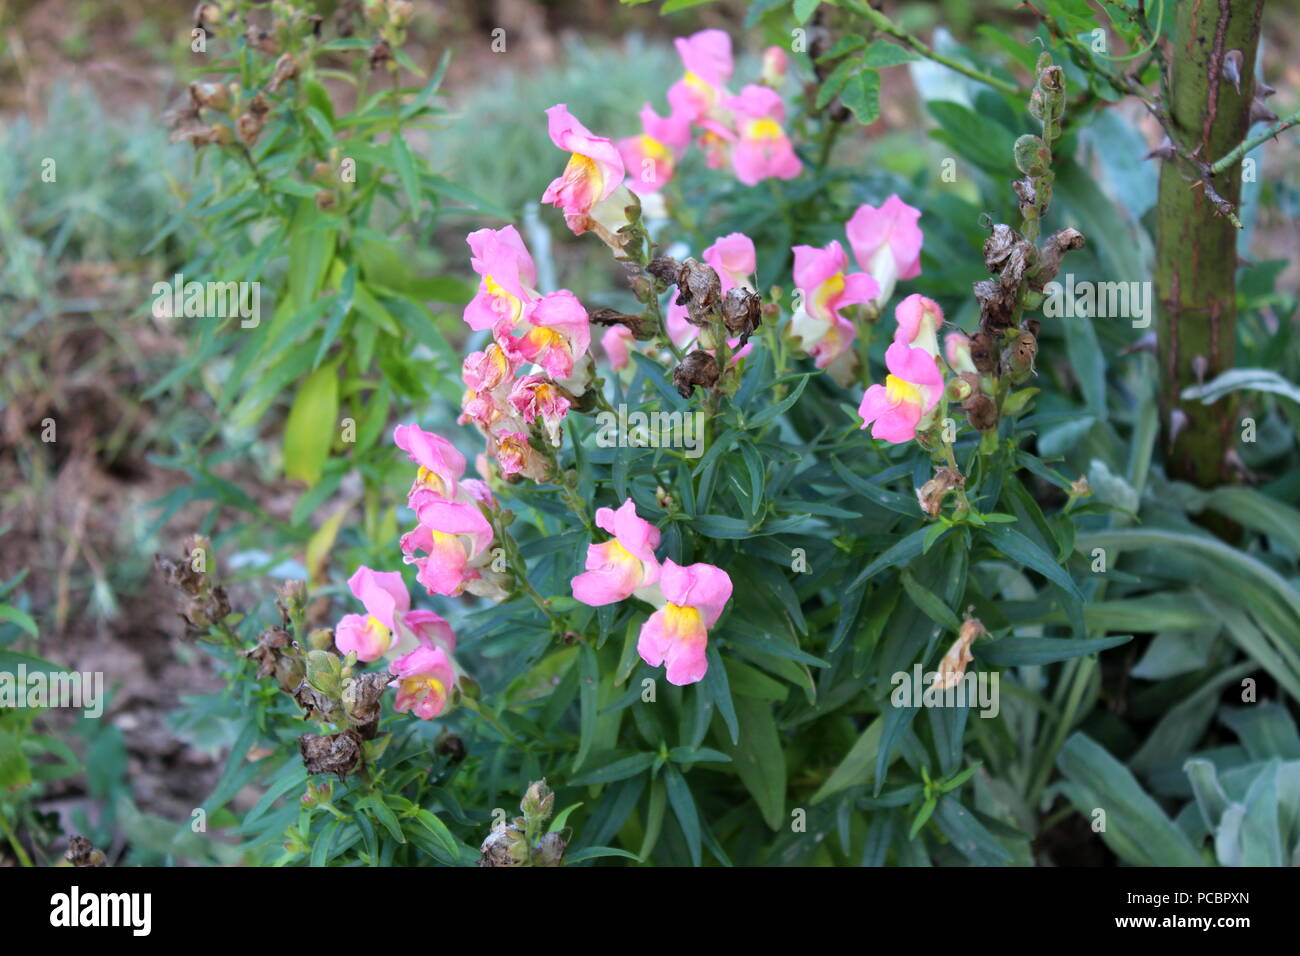 Common snapdragon or Antirrhinum majus small blooming and partially dried pink white flowers on dark green leaves and local garden vegetation backgrou Stock Photo